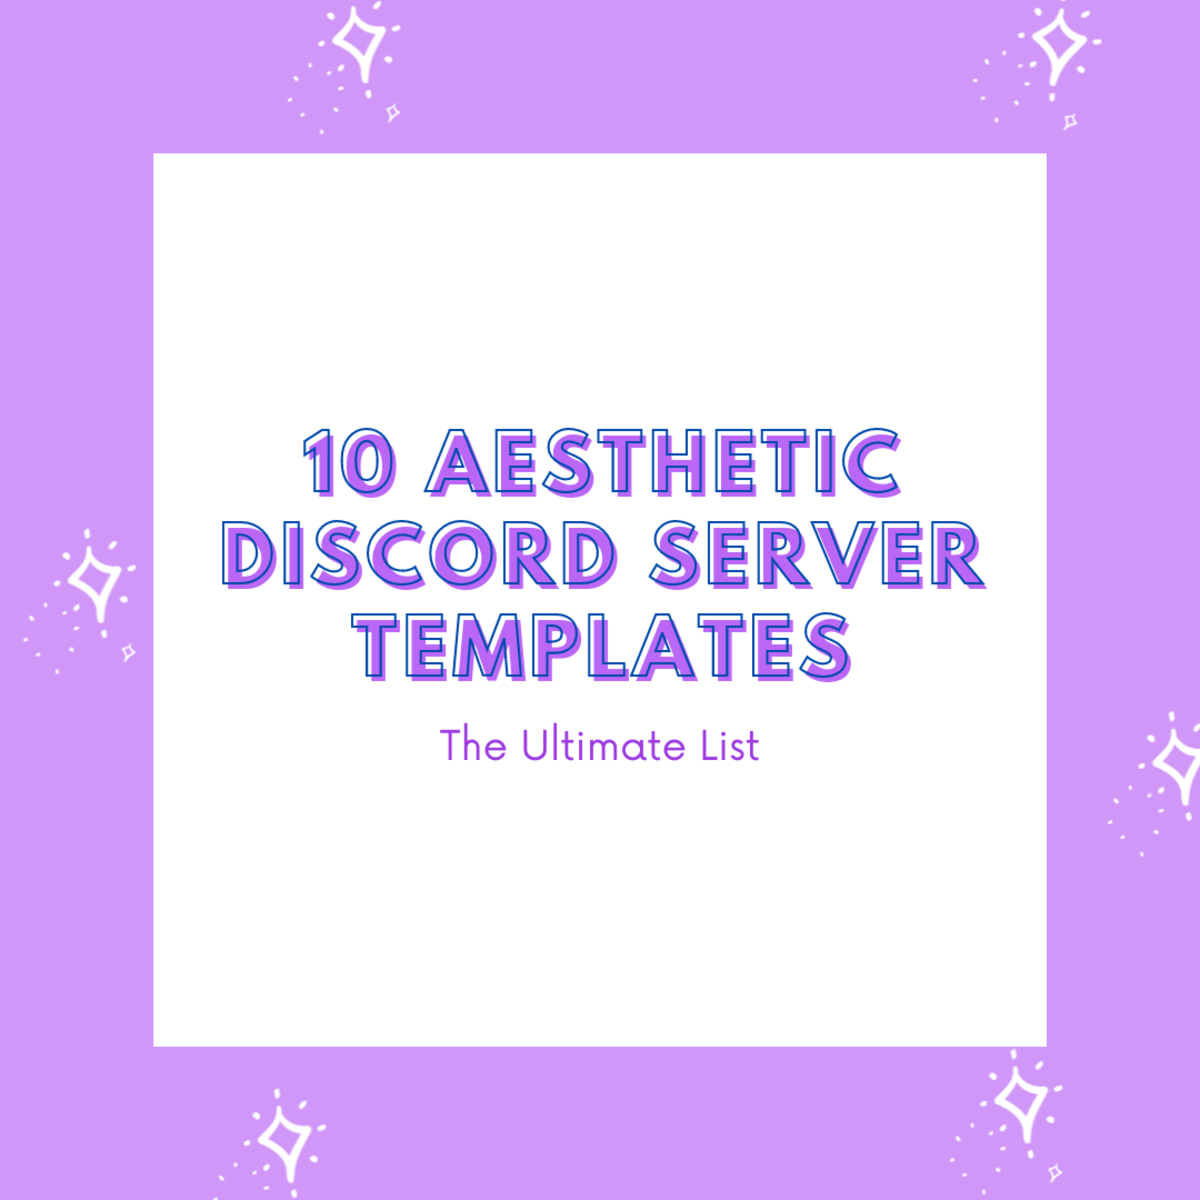 Discover 10 aesthetic Discord server templates in this in-depth guide!